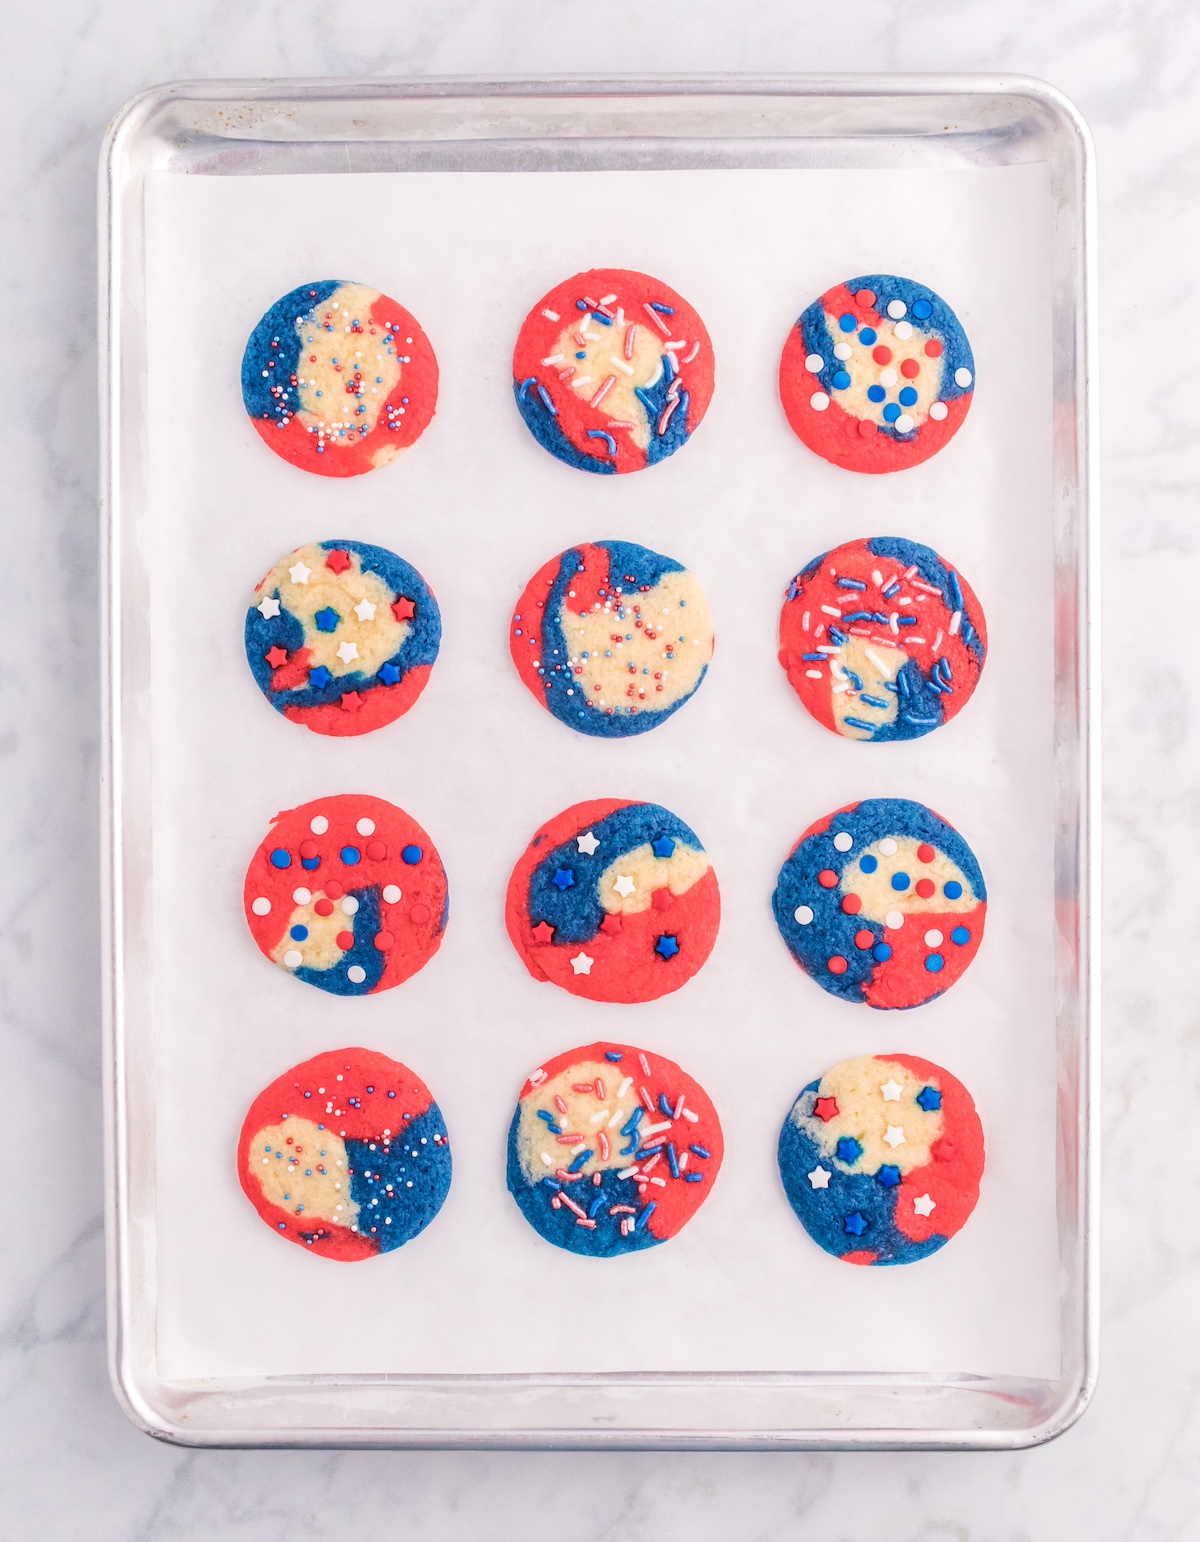 Baked red white and blue cookies on a baking sheet